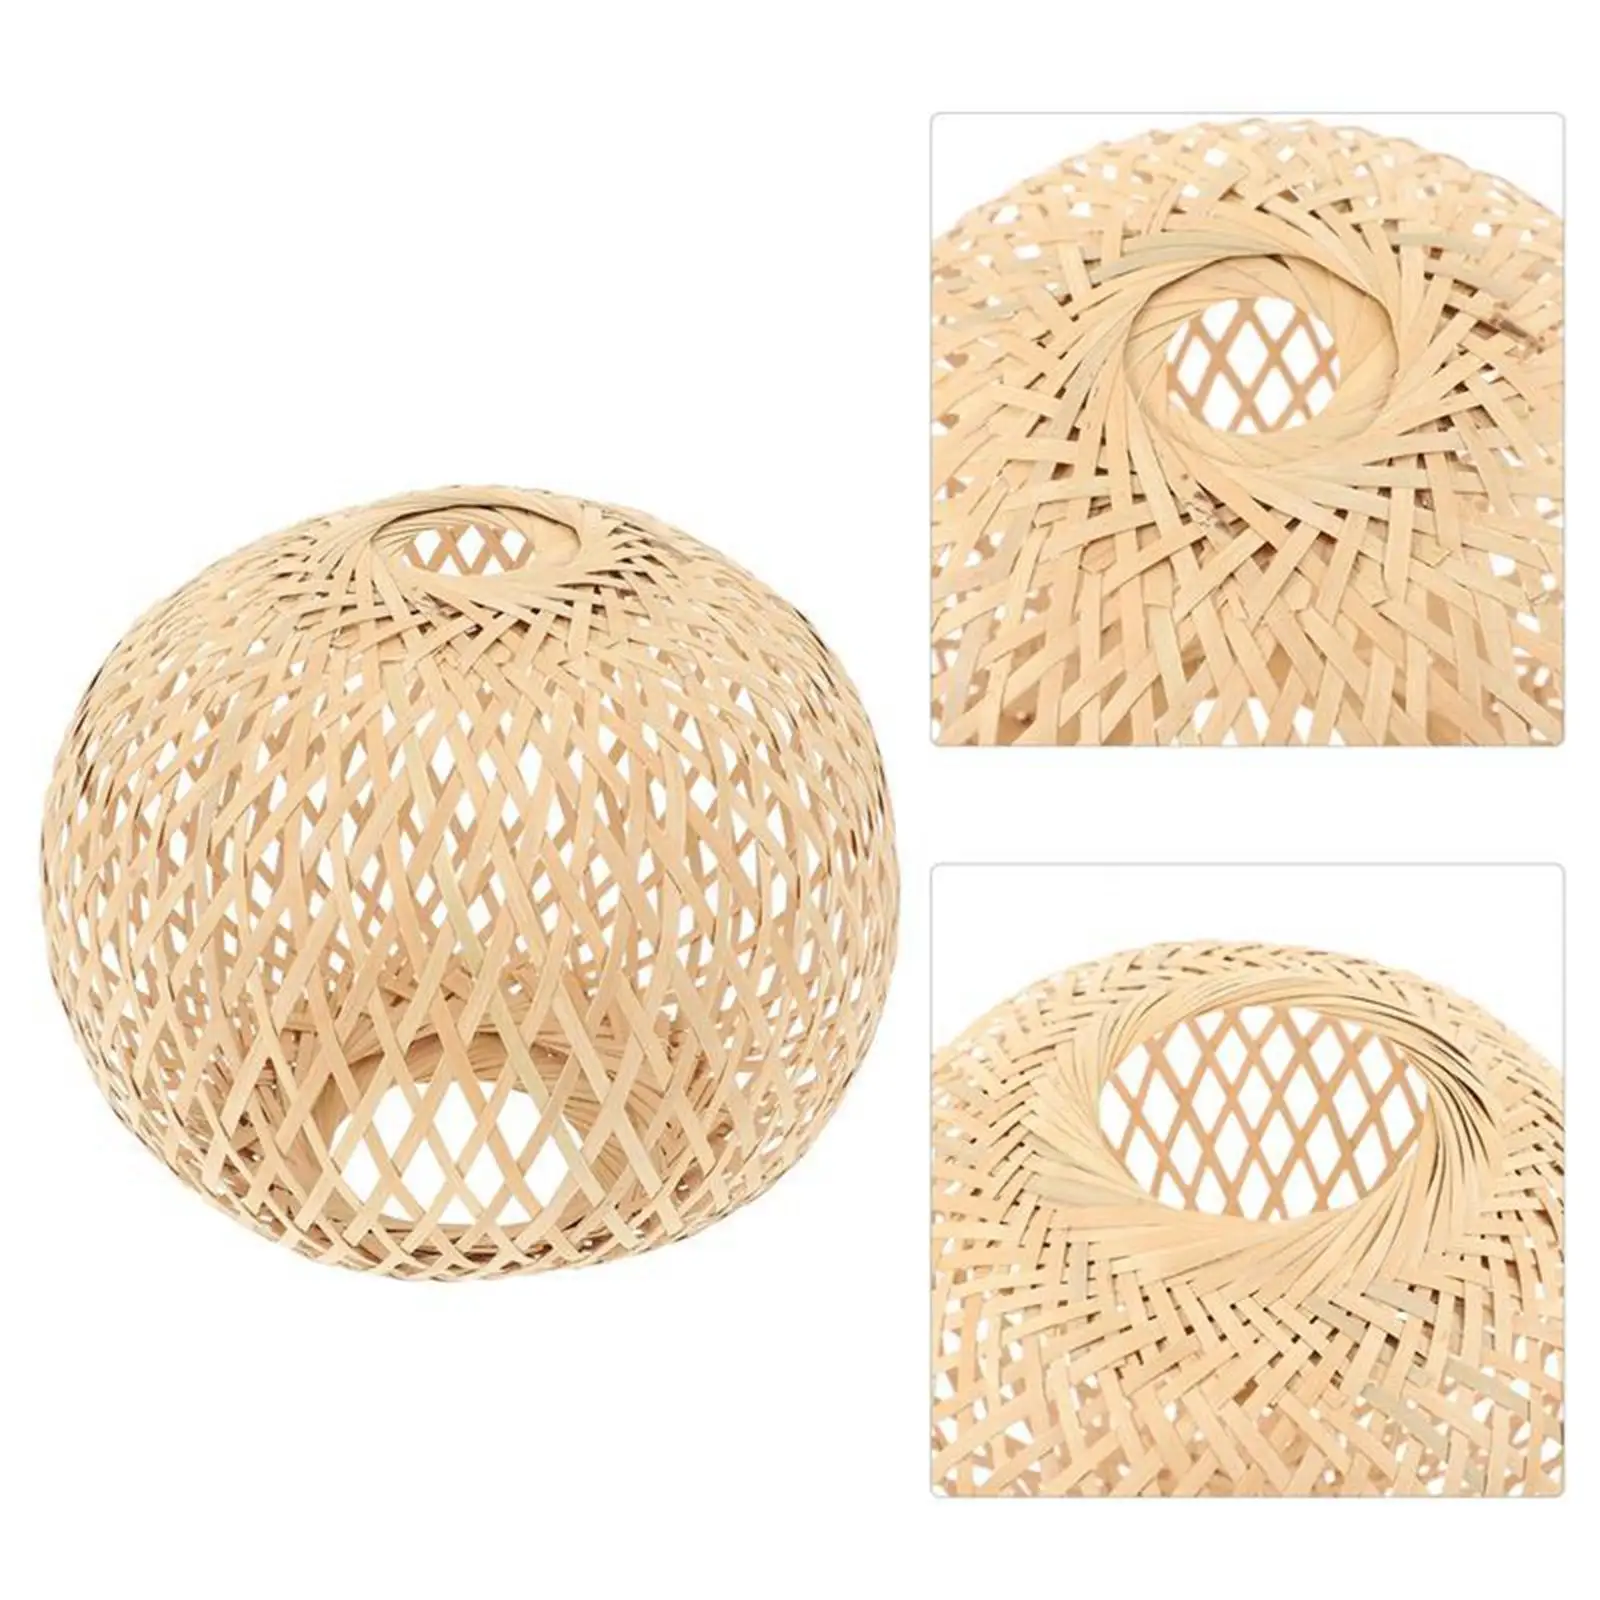 

Bamboo Woven Lampshade Handwoven Rustic for Kitchen Island Teahouse